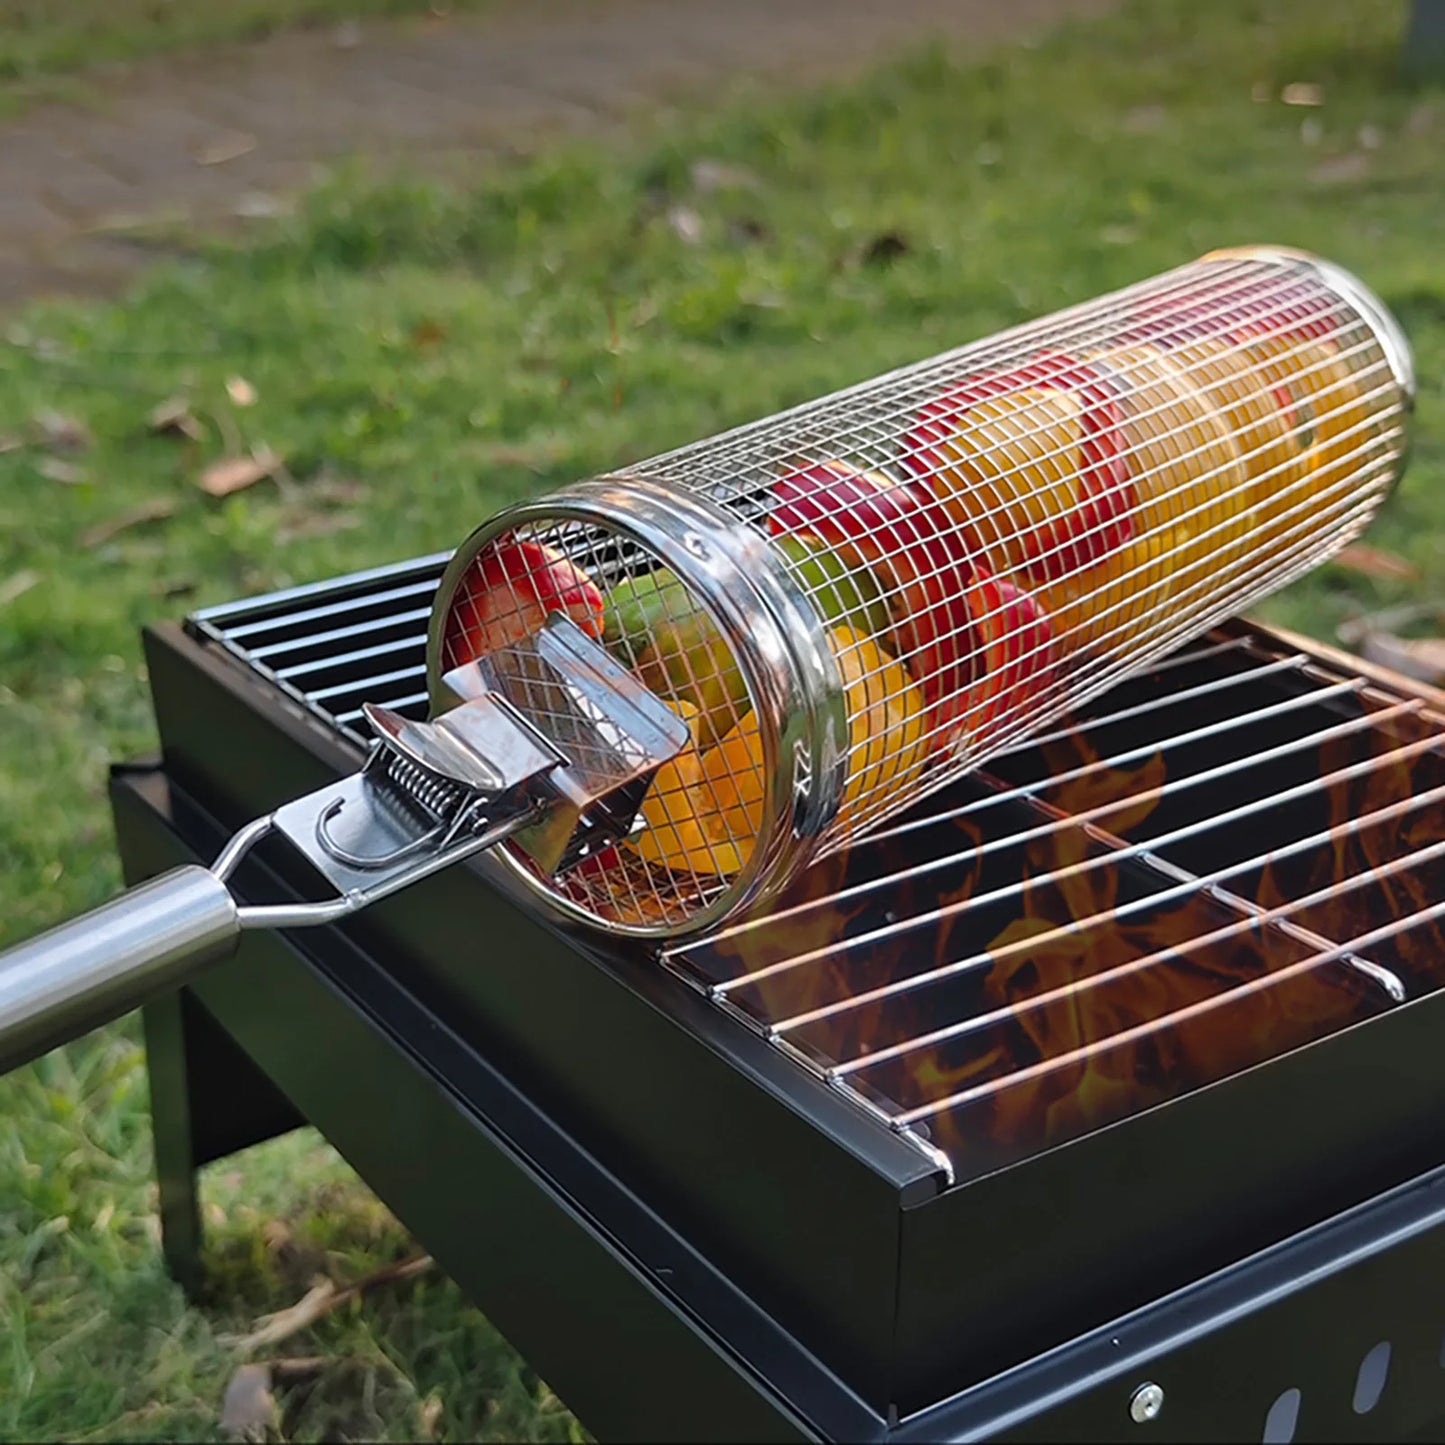 Take Your Grilling to the Next Level with Our Premium Quality and Long Lasting Stainless Steel Rolling Grilling Basket